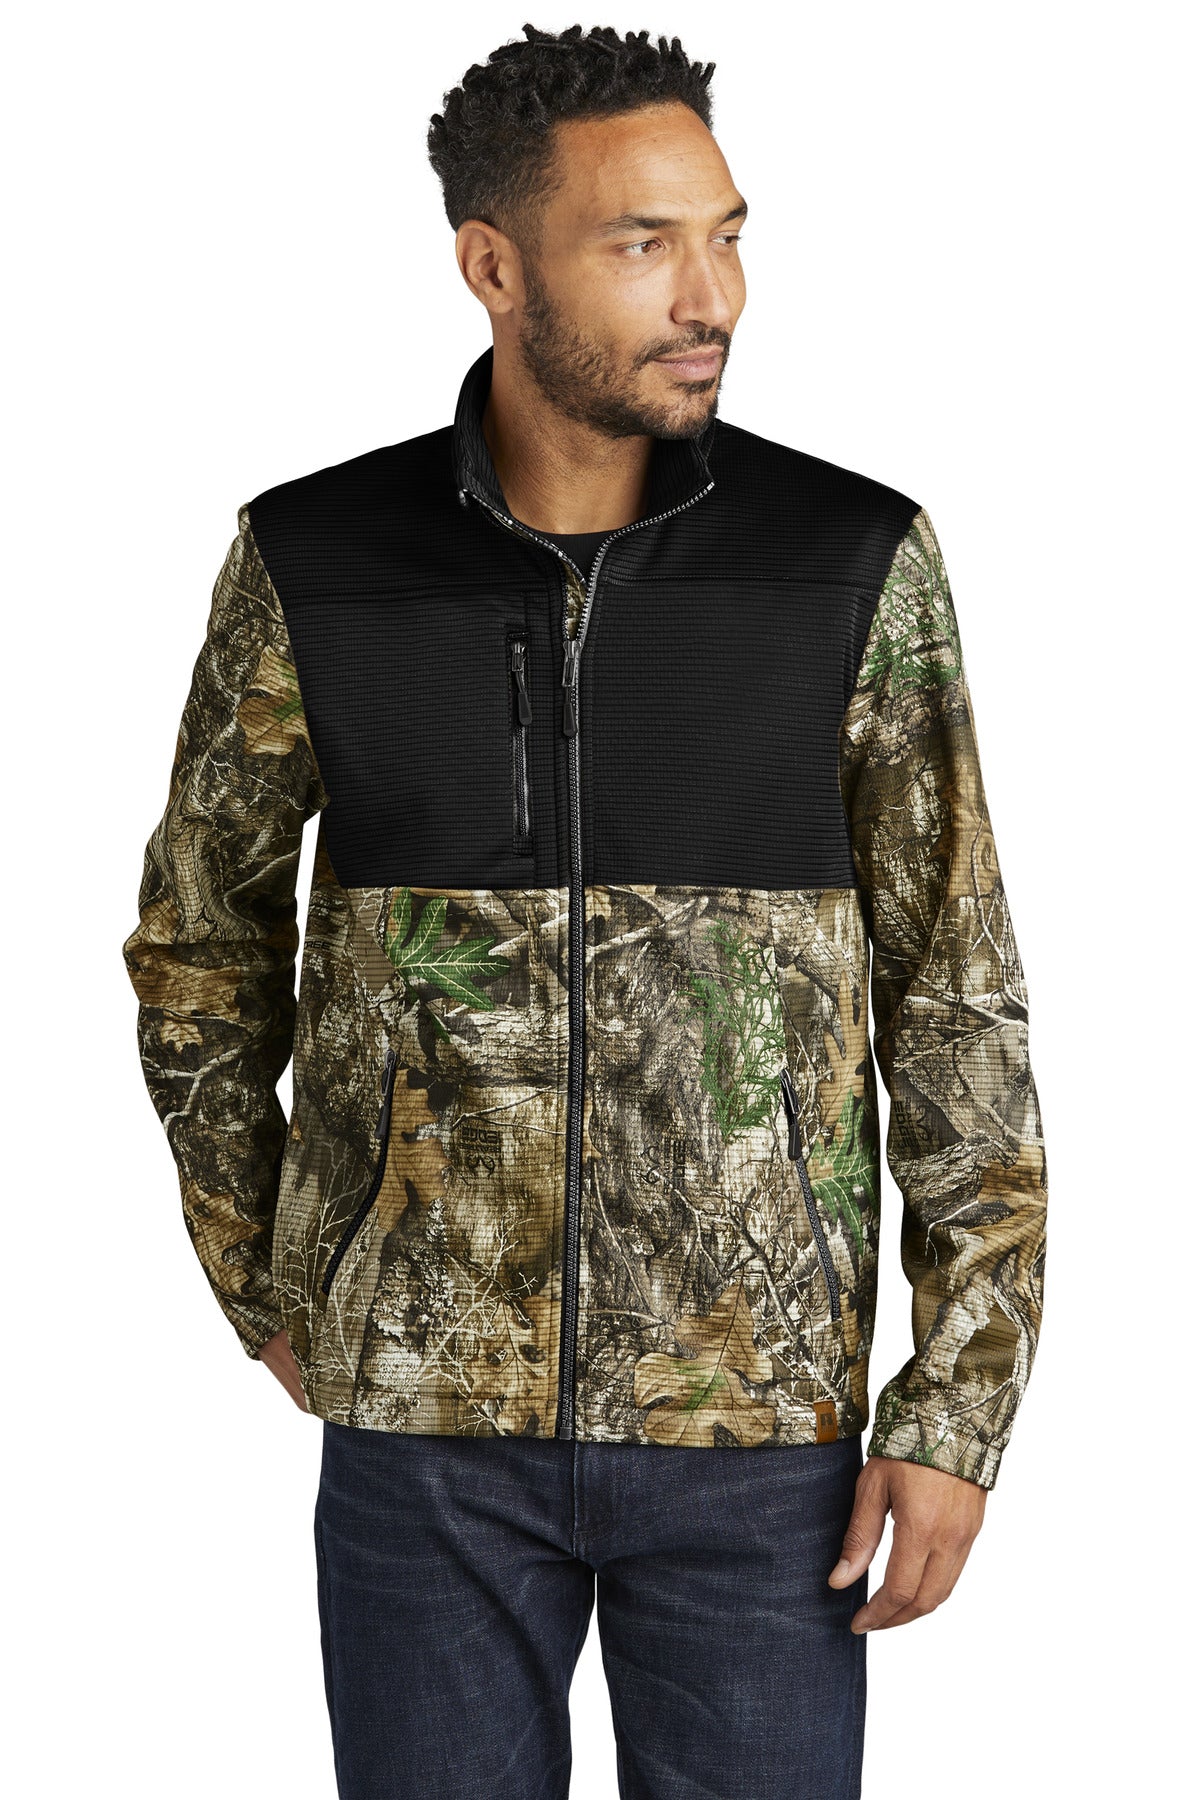 Outerwear Deep Black/ Realtree Edge Russell Outdoors